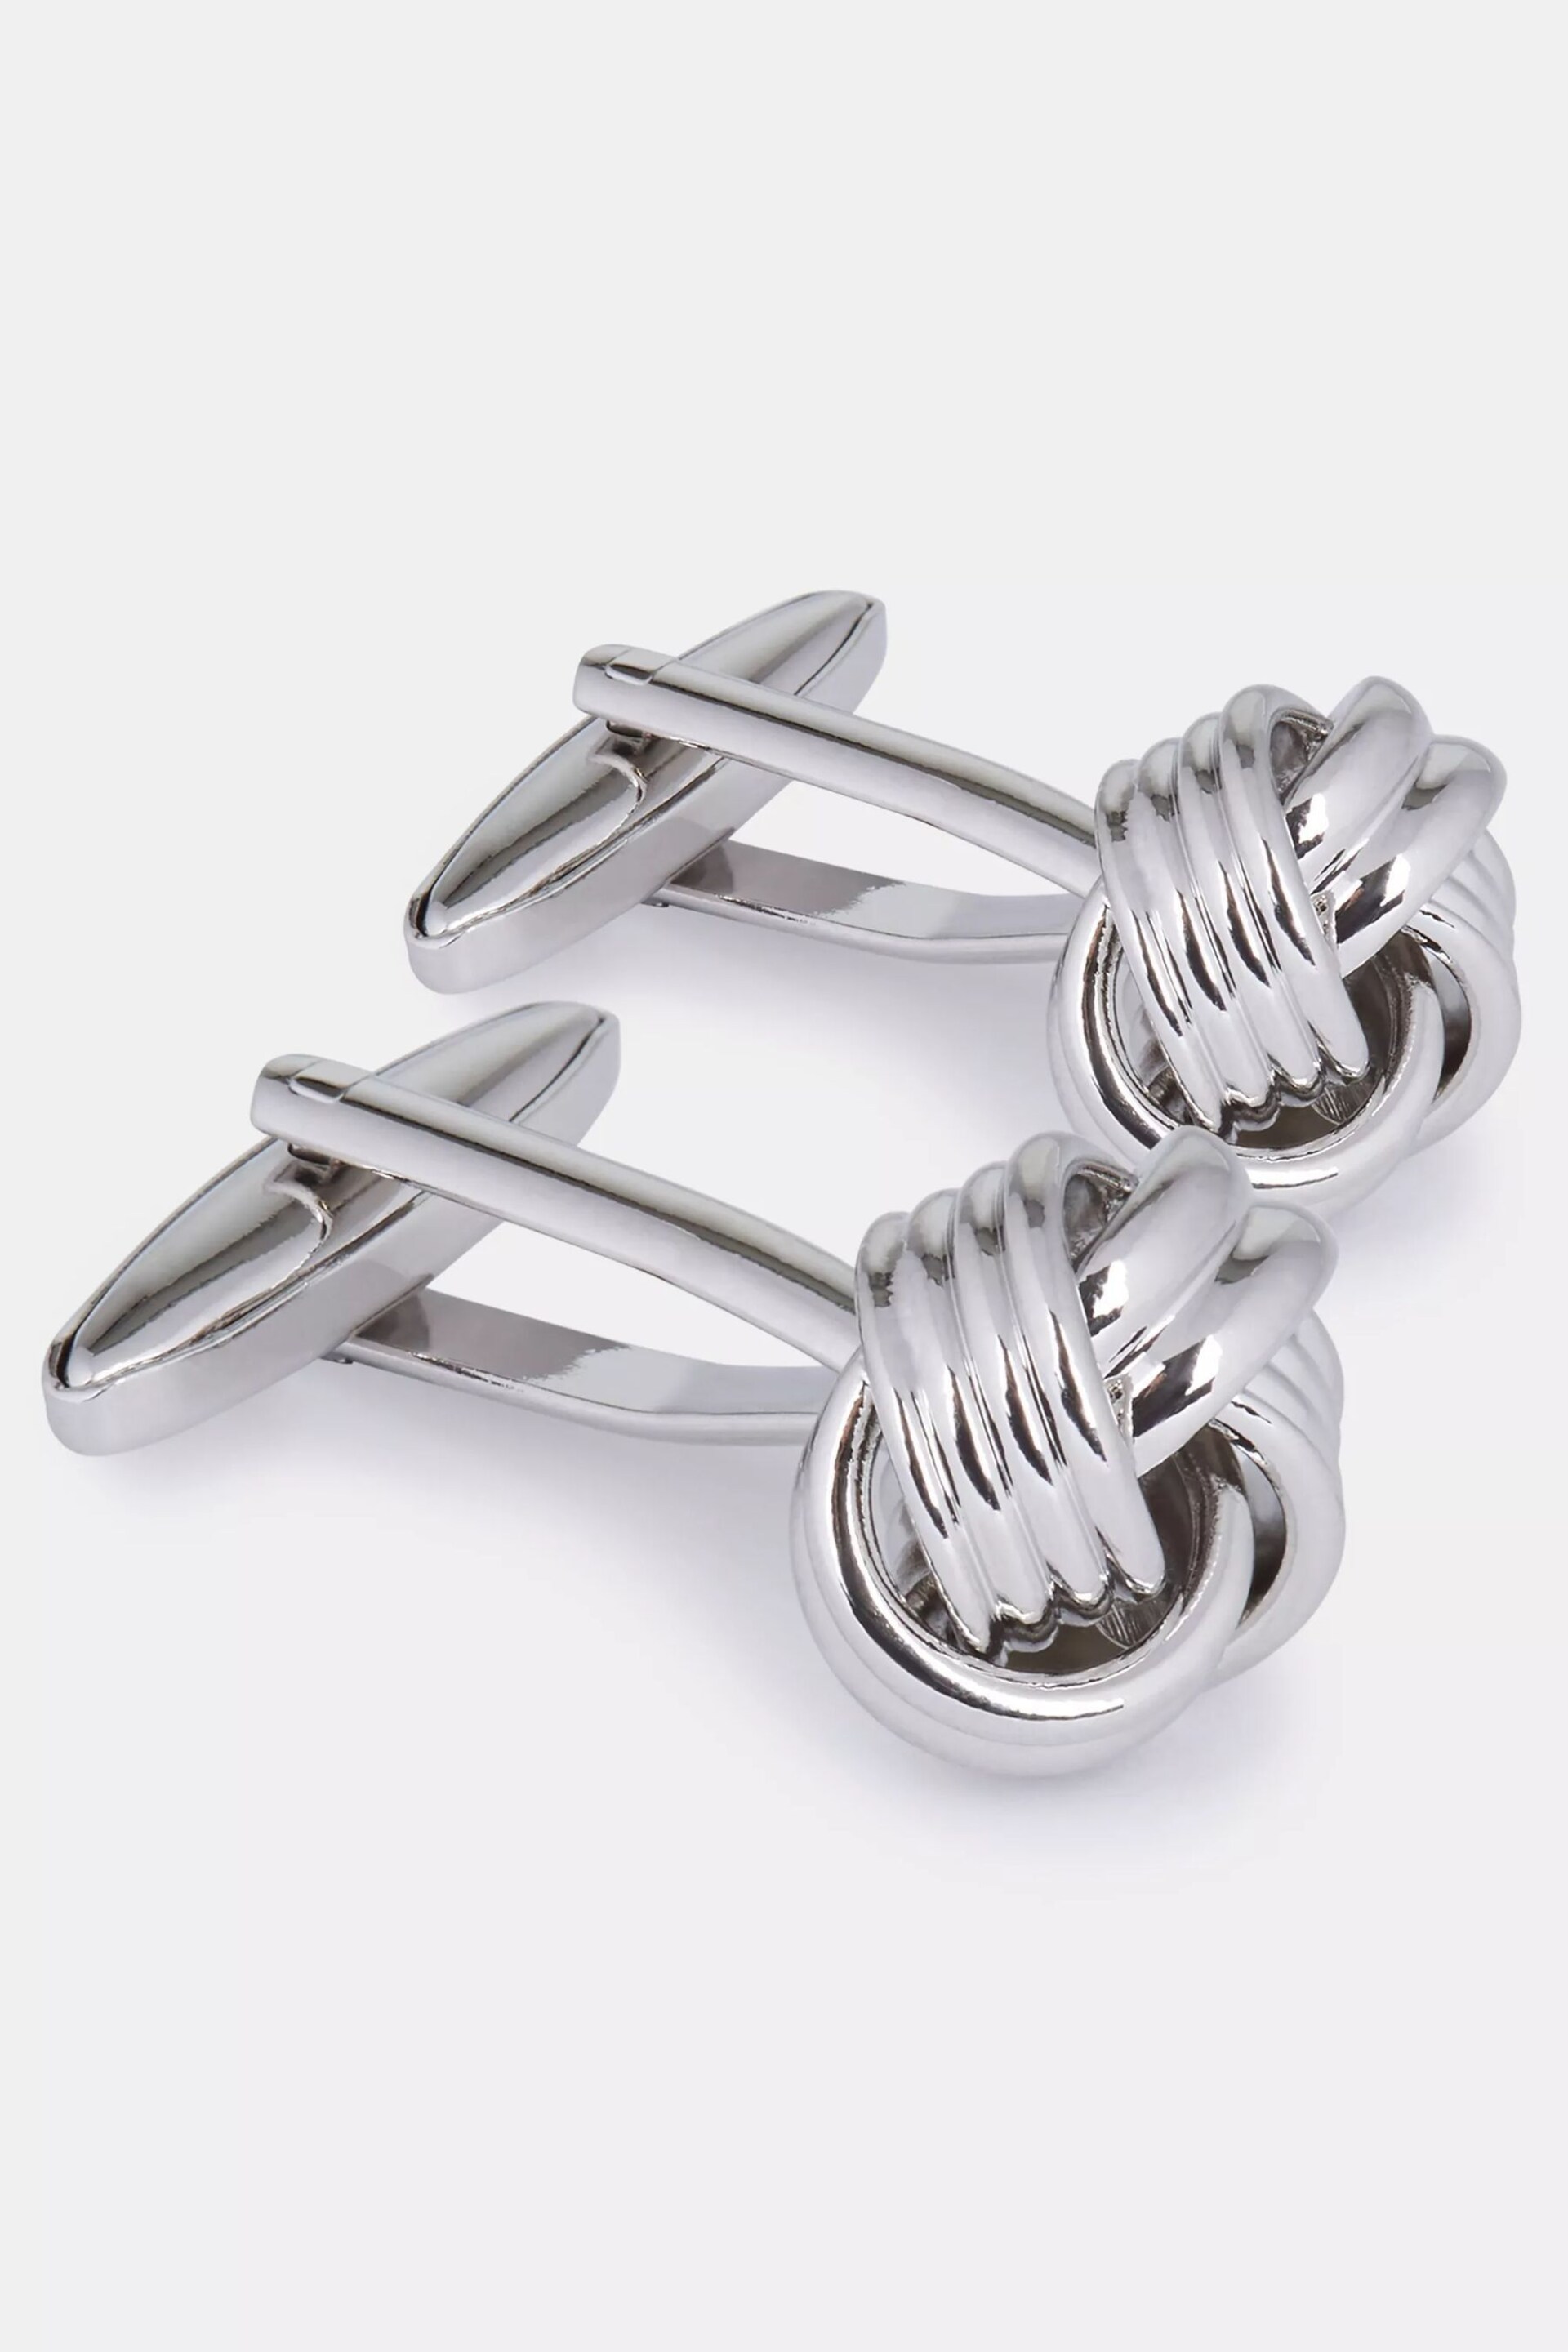 MOSS Grey Silver Silver Knot Cufflinks - Image 1 of 2